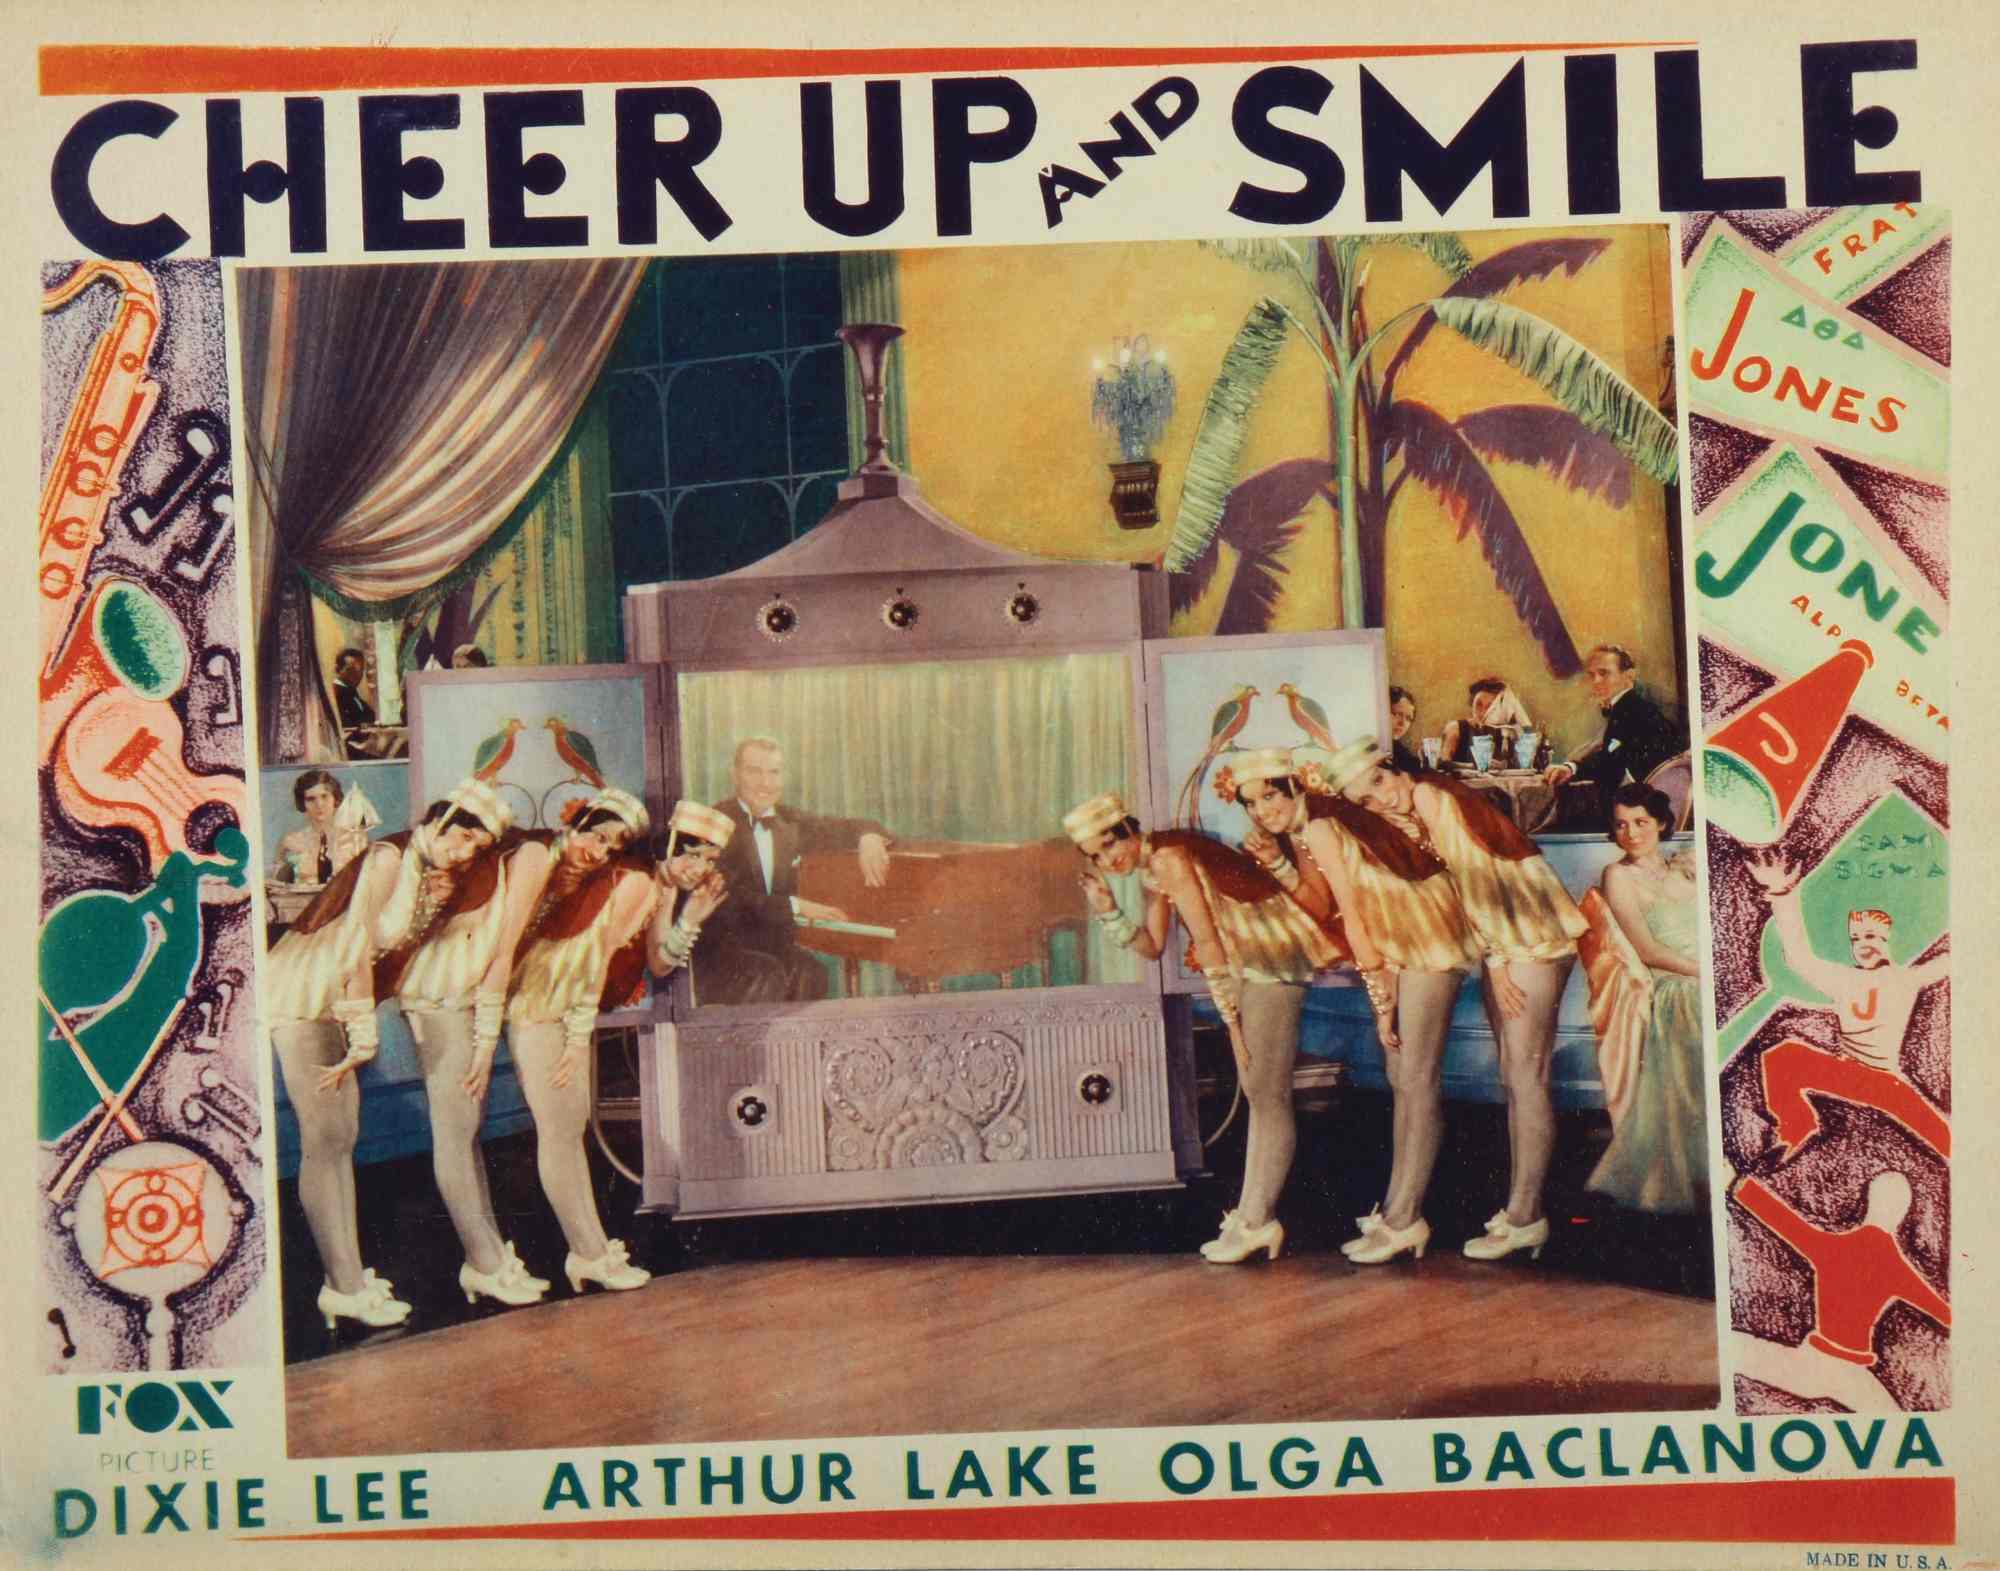 'Cheer Up and Smile' lobbycard with dancers bowing down